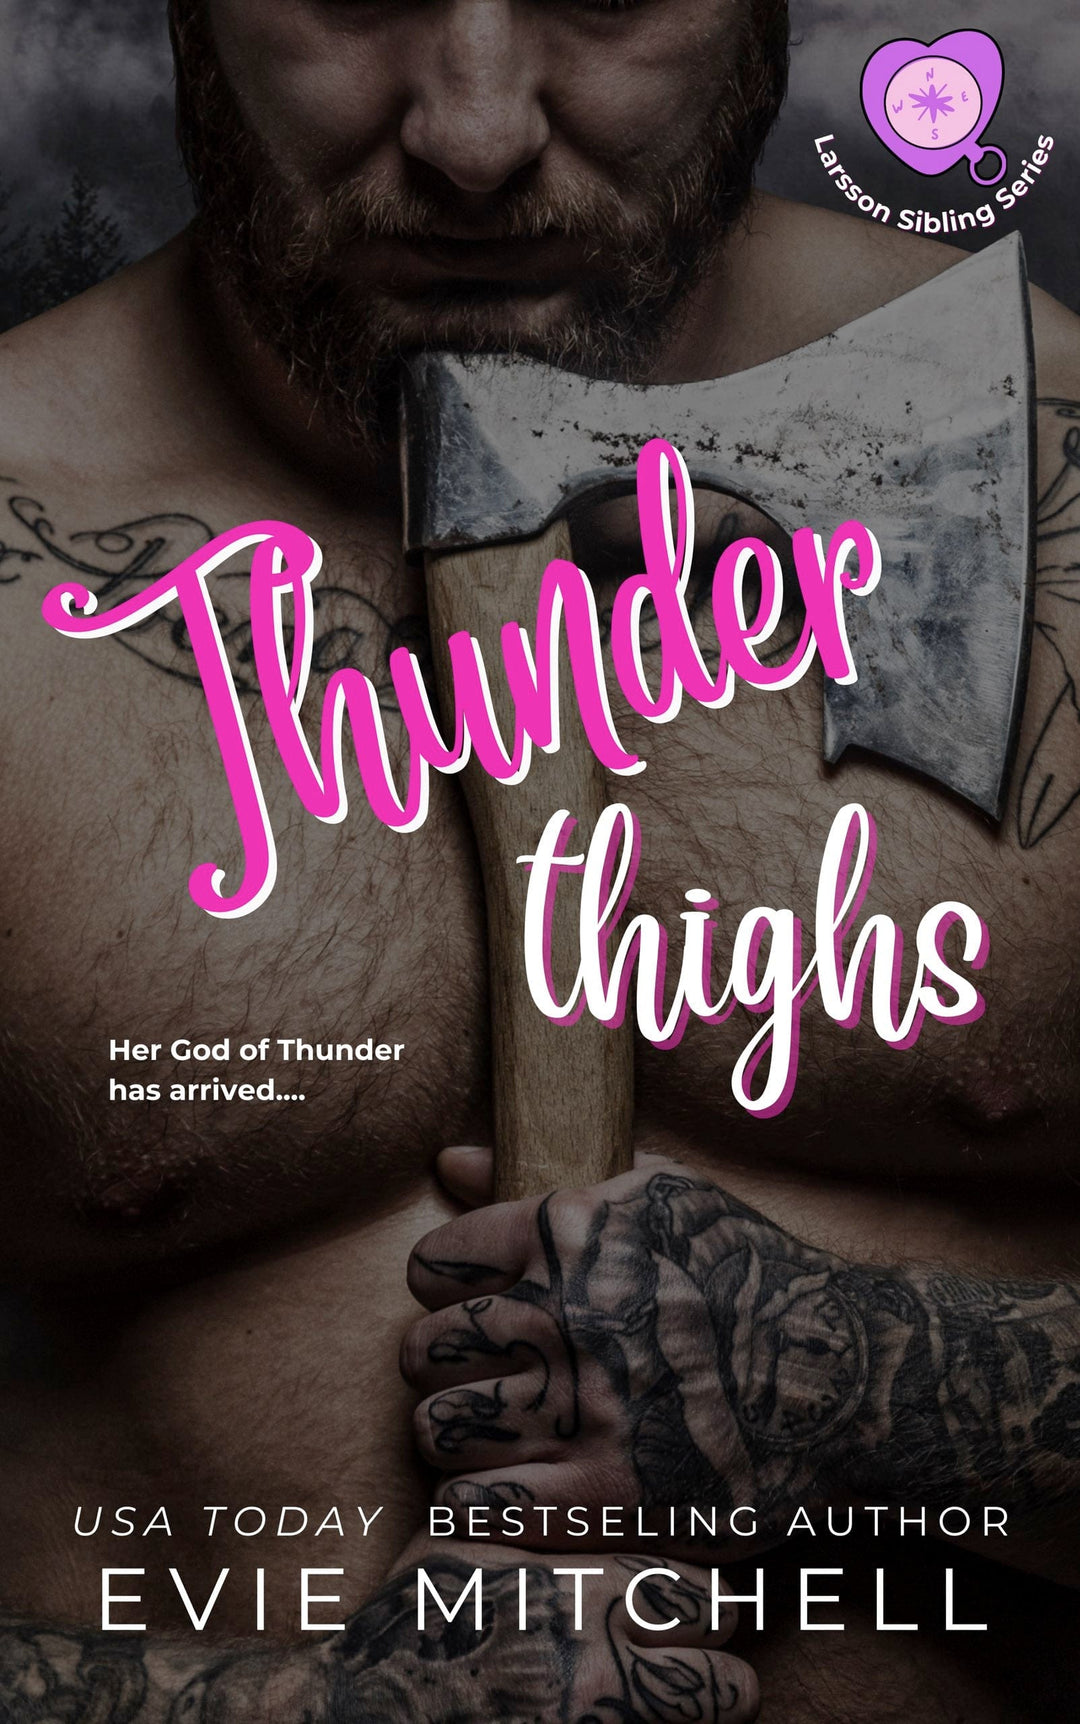 Evie Mitchell eBook Axe Cover Thunder Thighs (EBOOK)